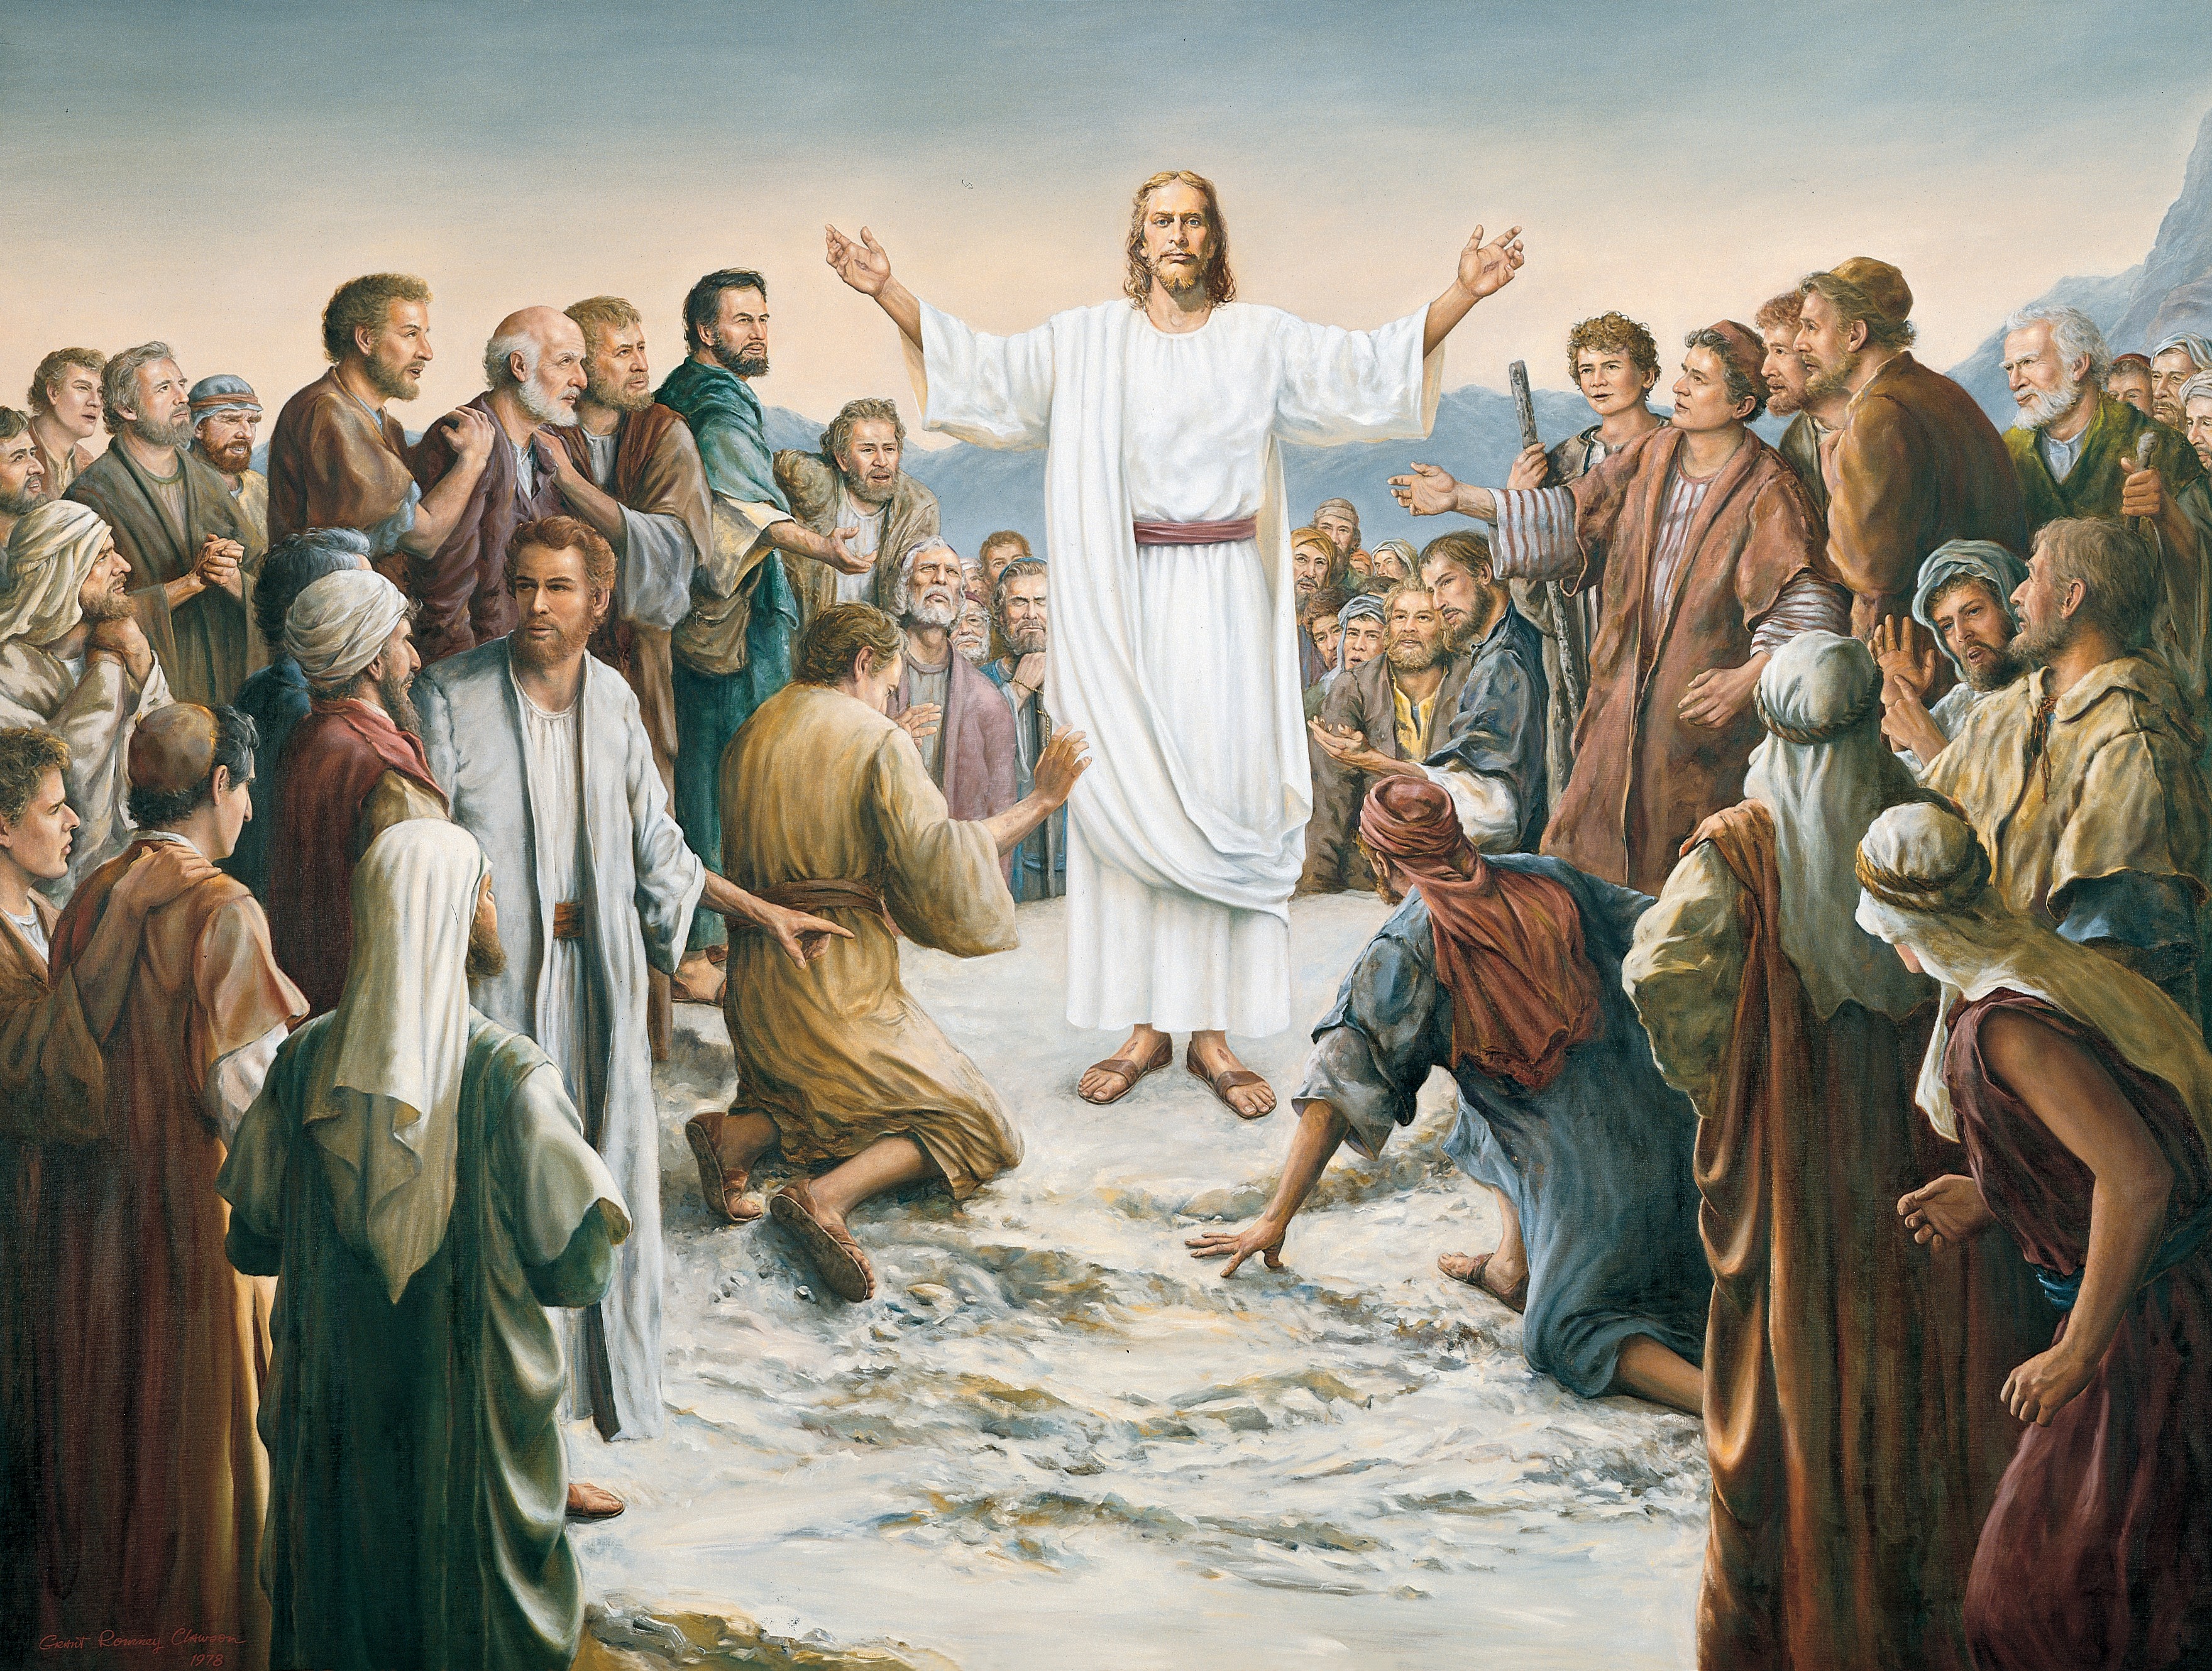 Jesus Christ in white robes and a red sash stands in the midst of a large group with His wounded hands outstretched.